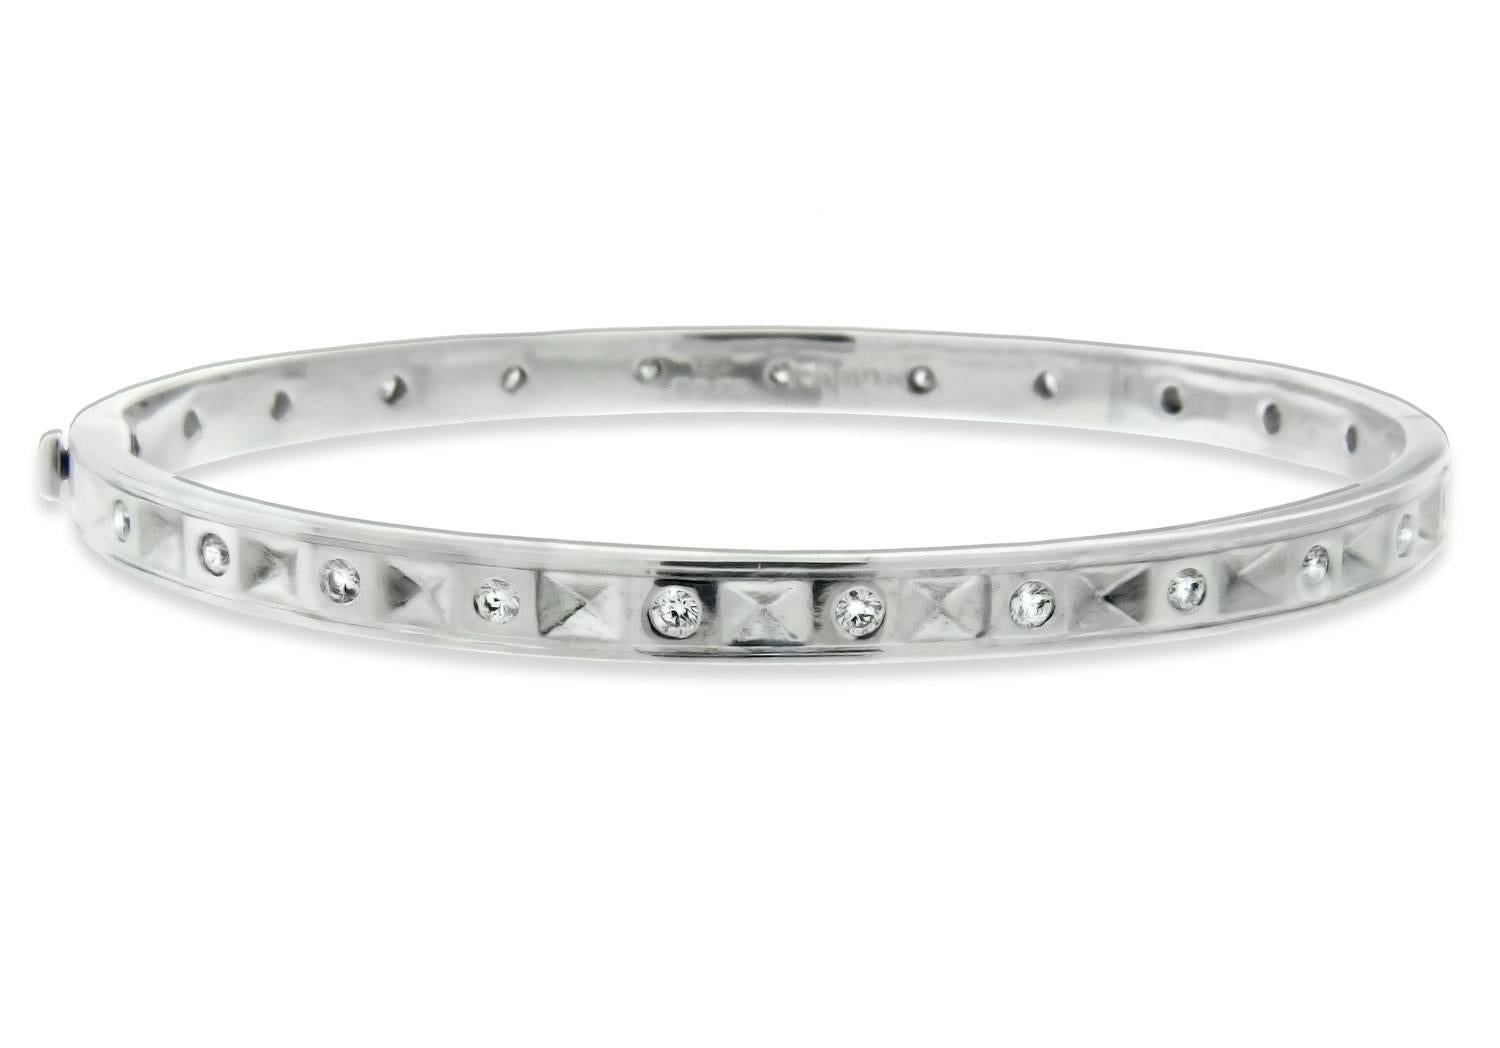 This 18 karat white gold bangle bracelet by Danuta is perfect as a solitary piece or to stack with others! Inset twinkling white diamonds (totaling .75 carats) continue around the entire design so there is never a plain side showing. For some added